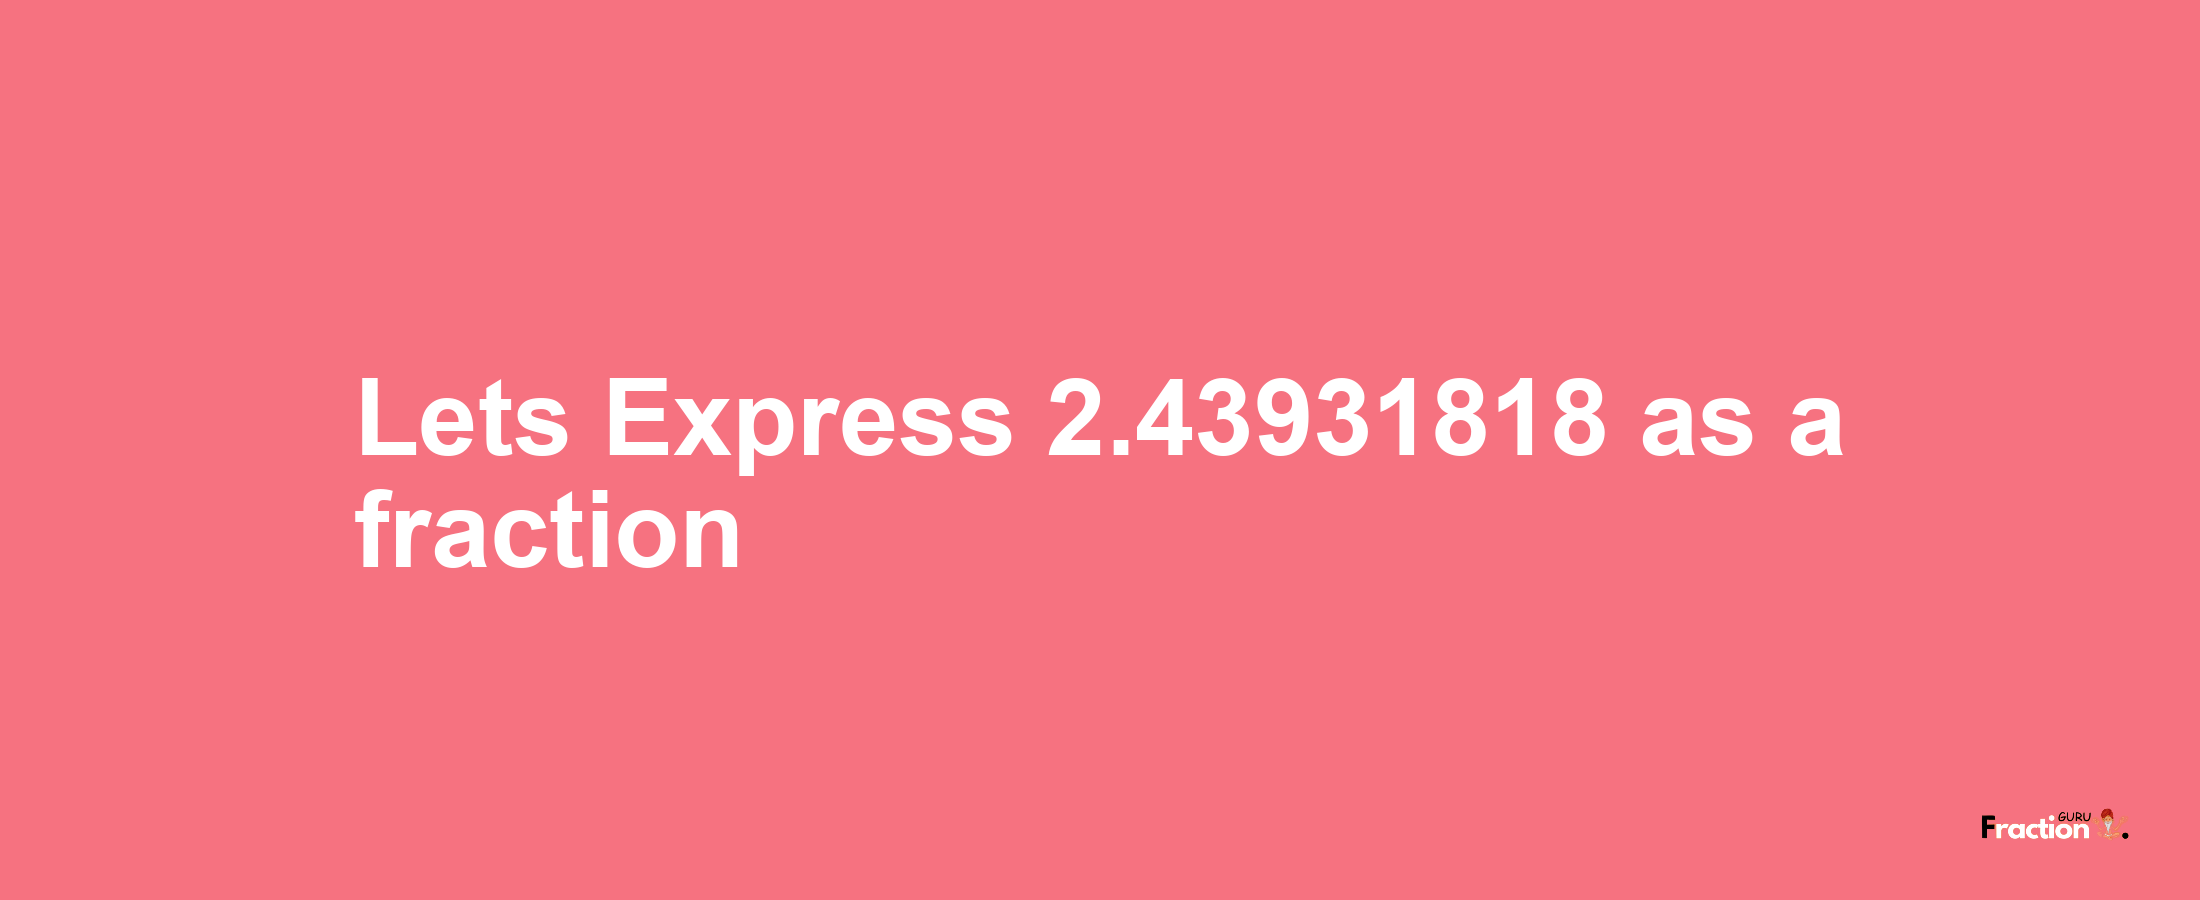 Lets Express 2.43931818 as afraction